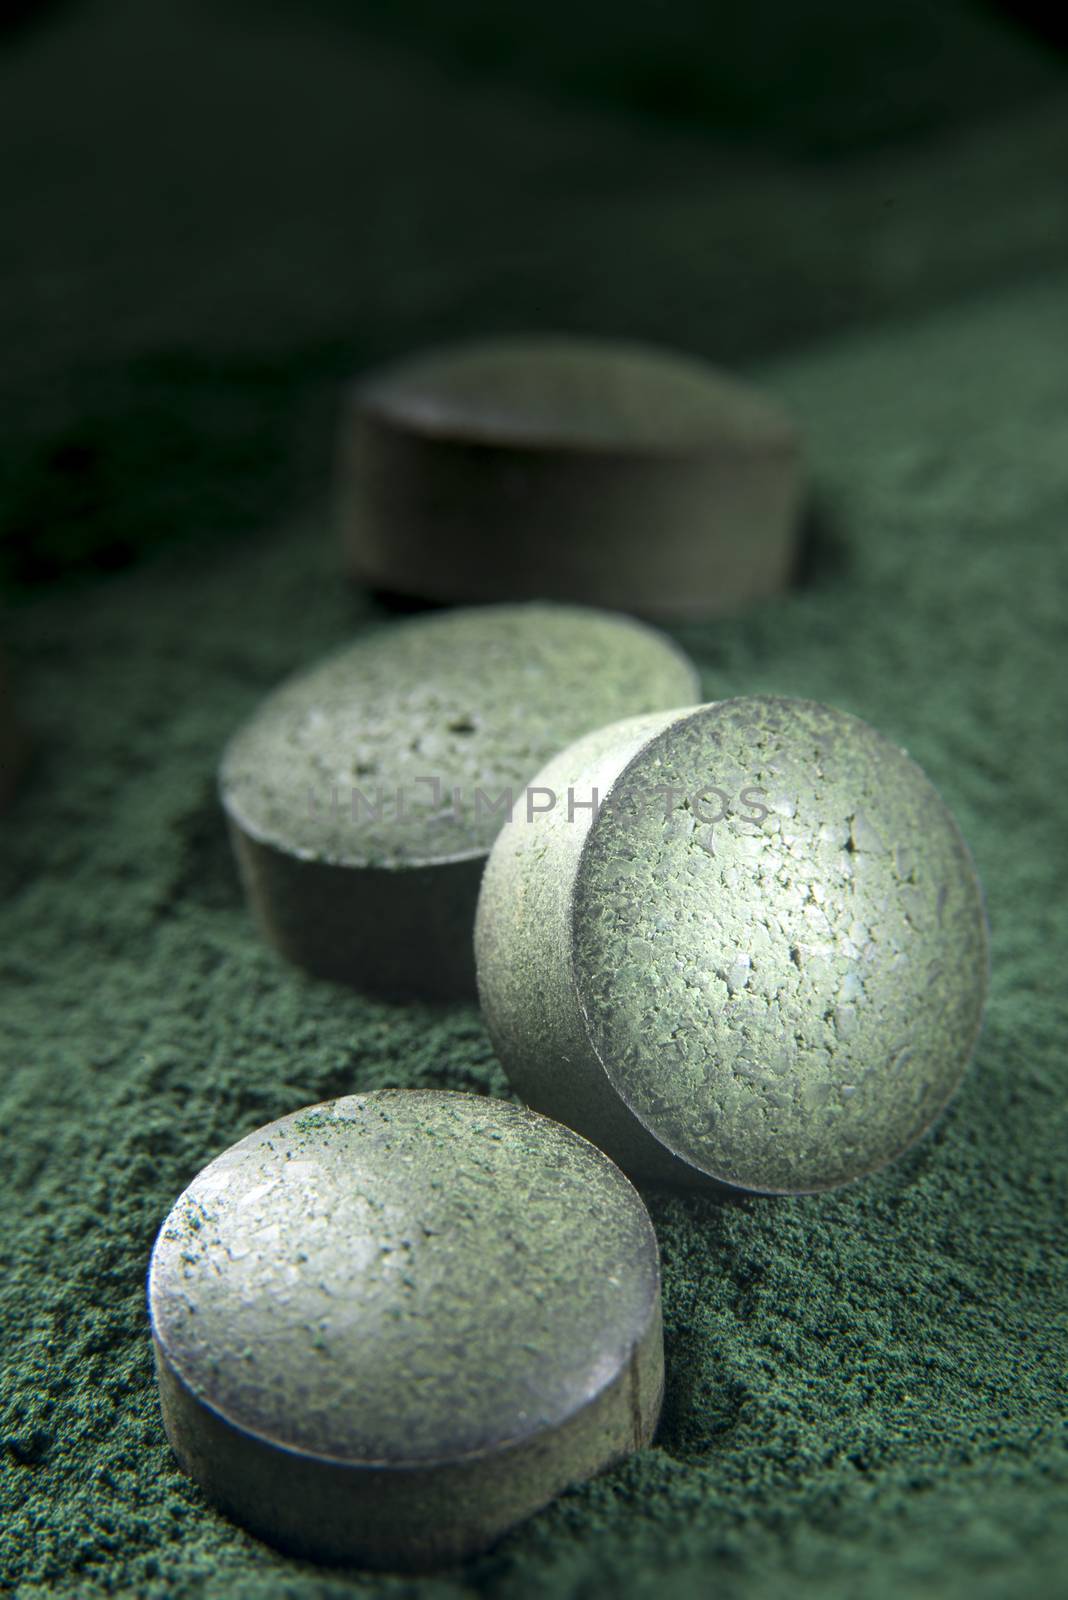 Spirulina tablets and powder, dietary supplement. by Olivier-Le-Moal